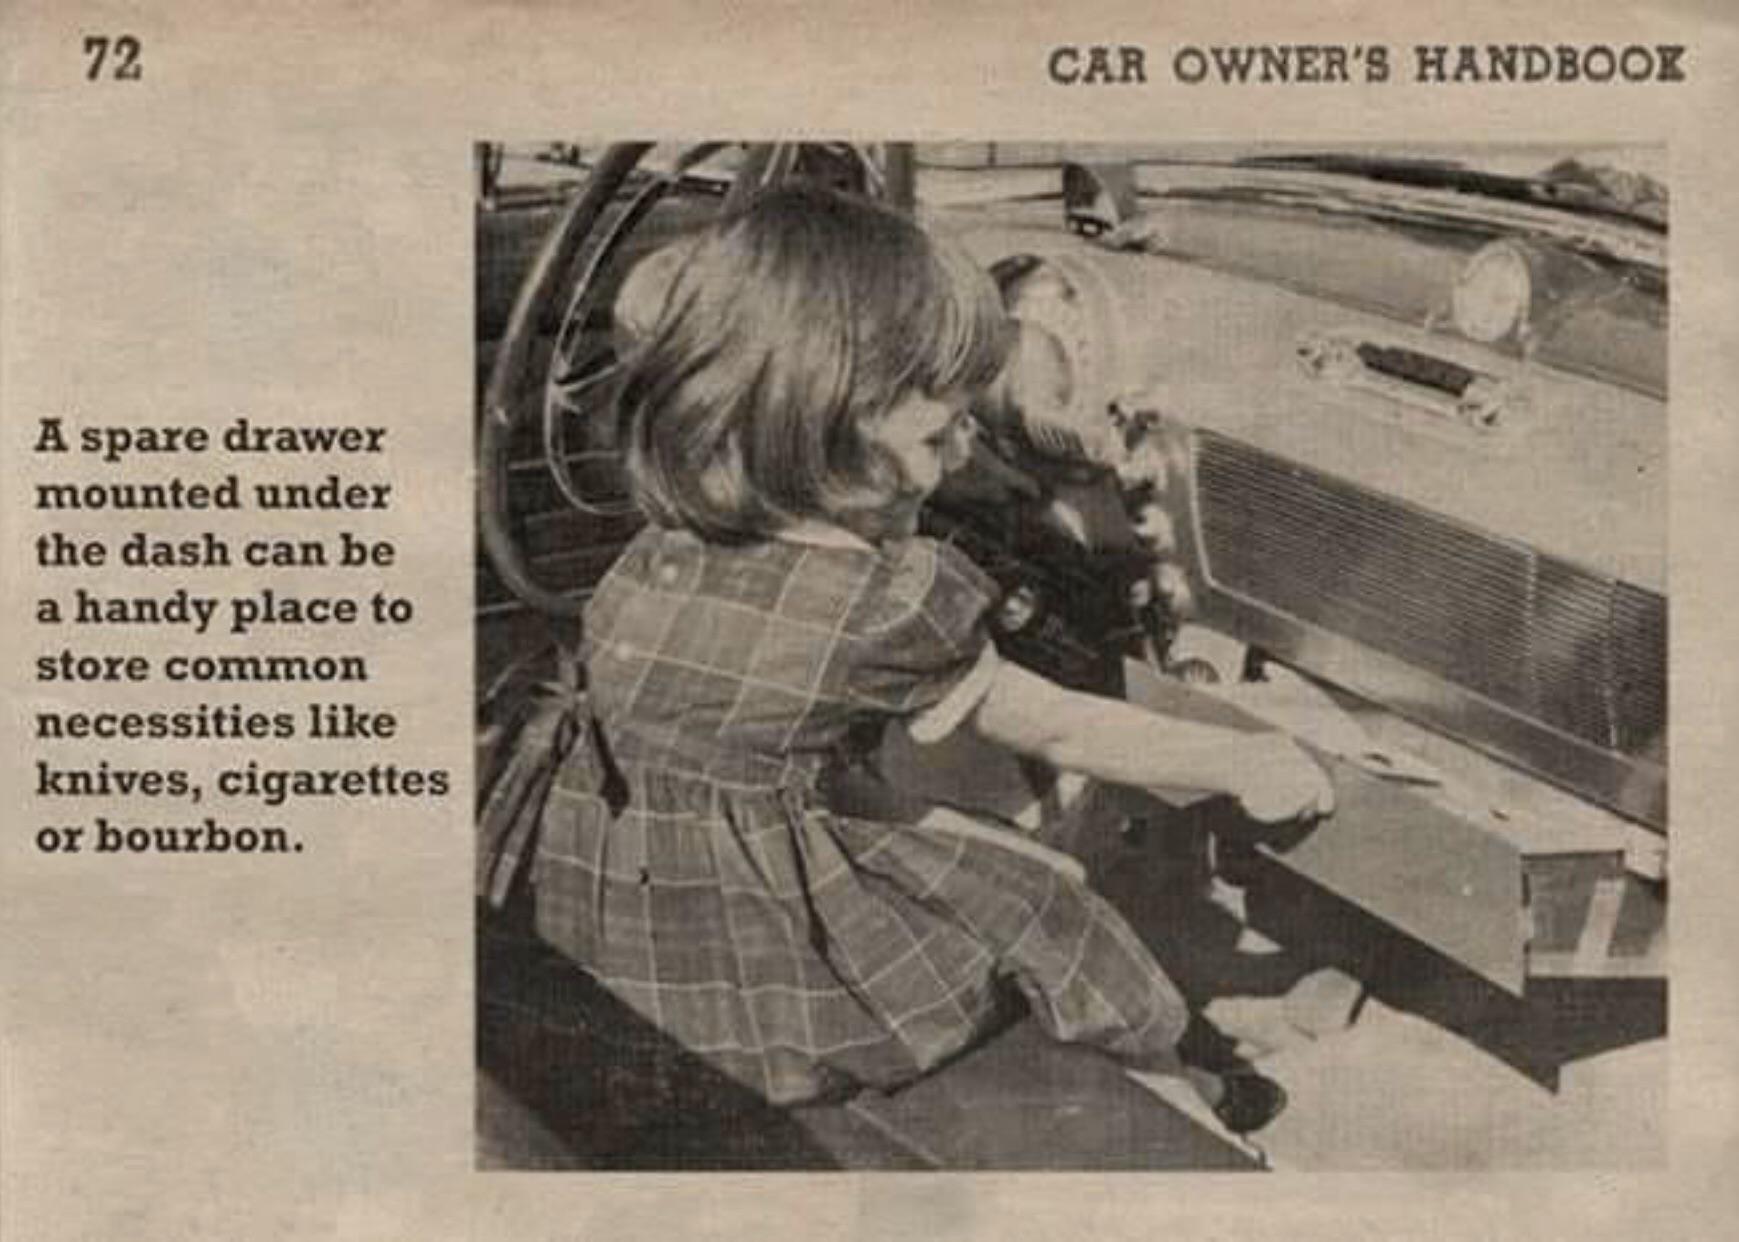 Car owners manuals were lit.